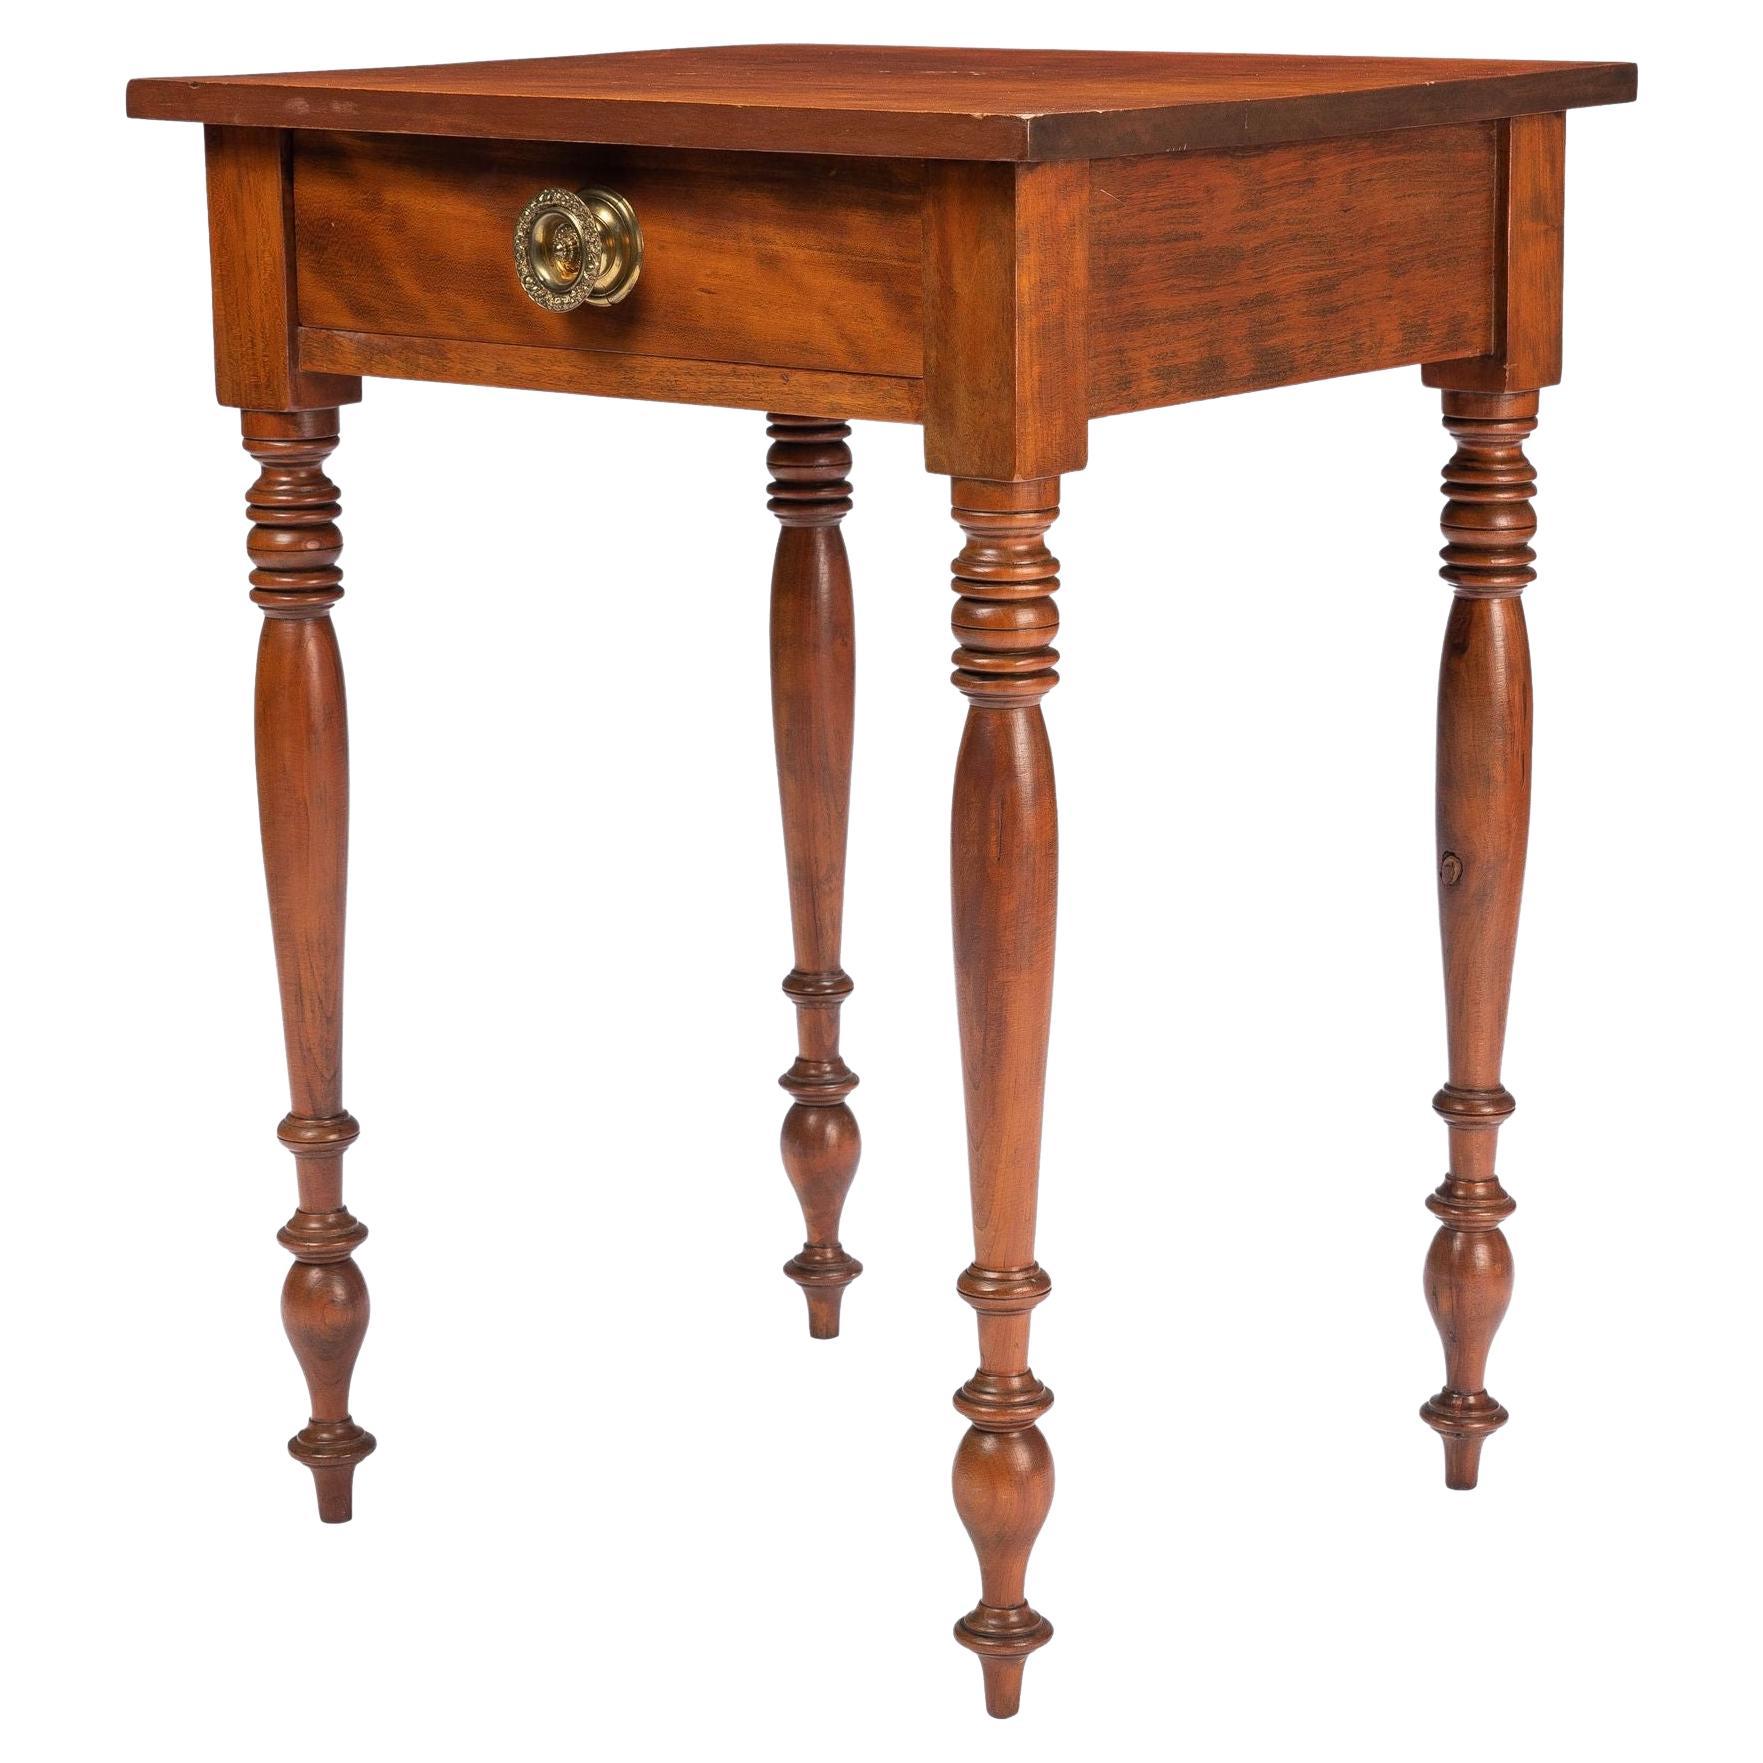 American Sheraton Curly Cherry Wood One Drawer Stand, 1820